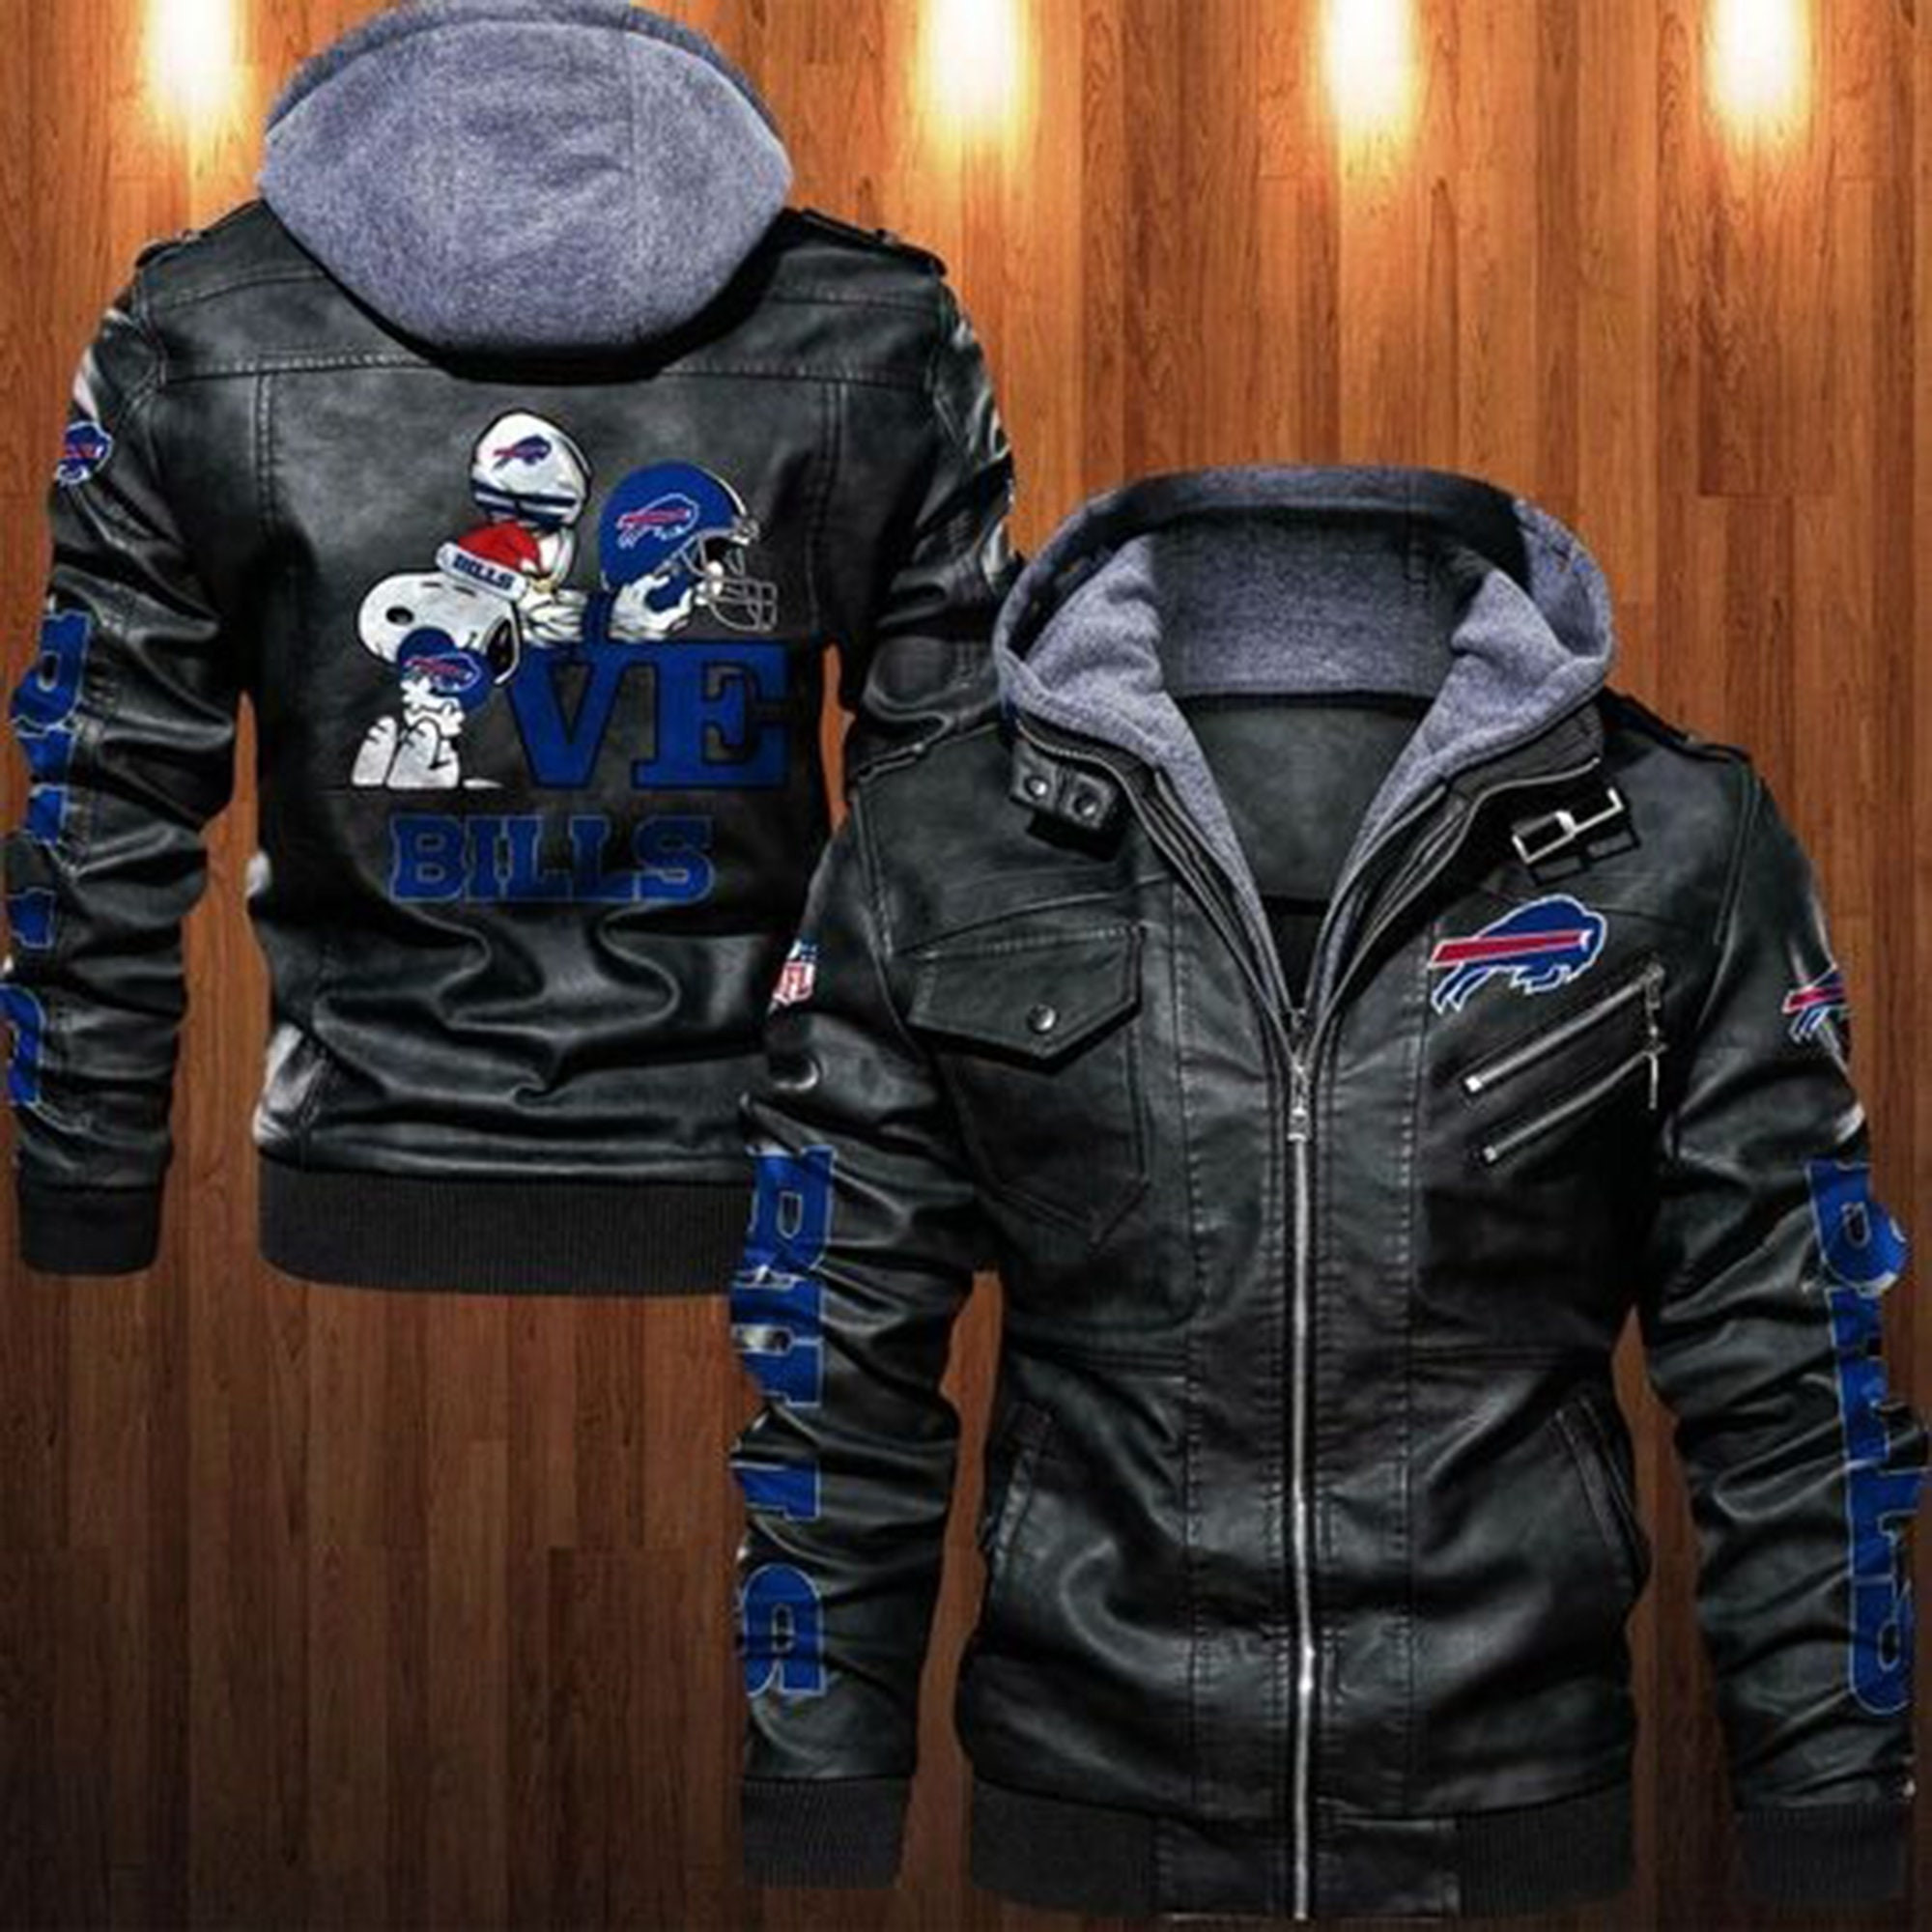 These Amazing Leather Jacket will add to the appeal of your outfit 72